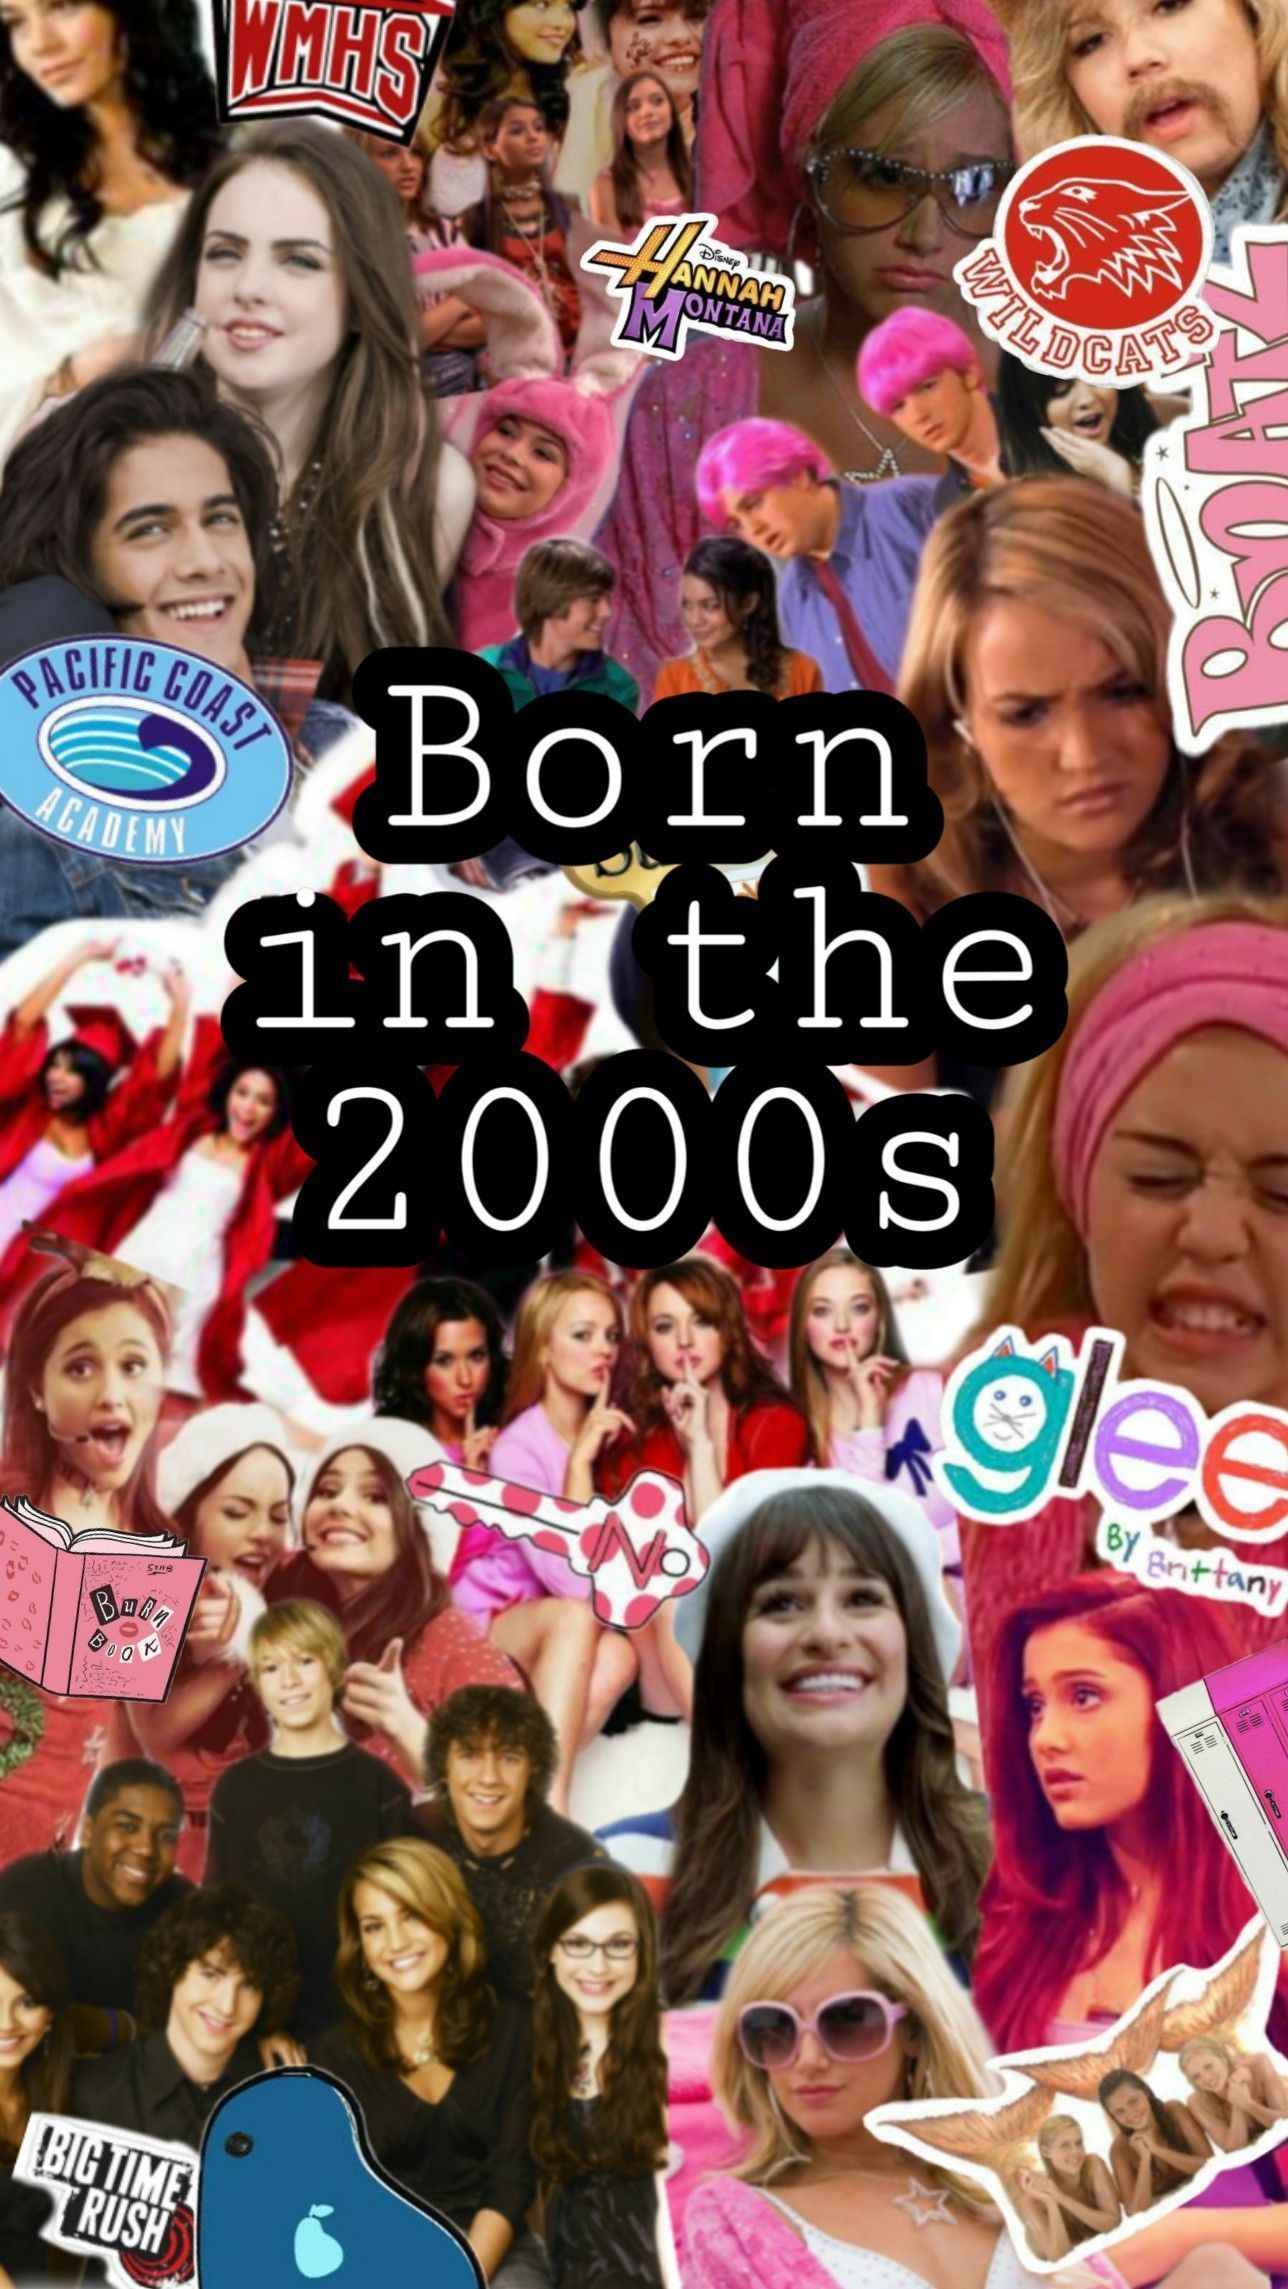 A collage of pictures with the words born in 2013 - 2000s